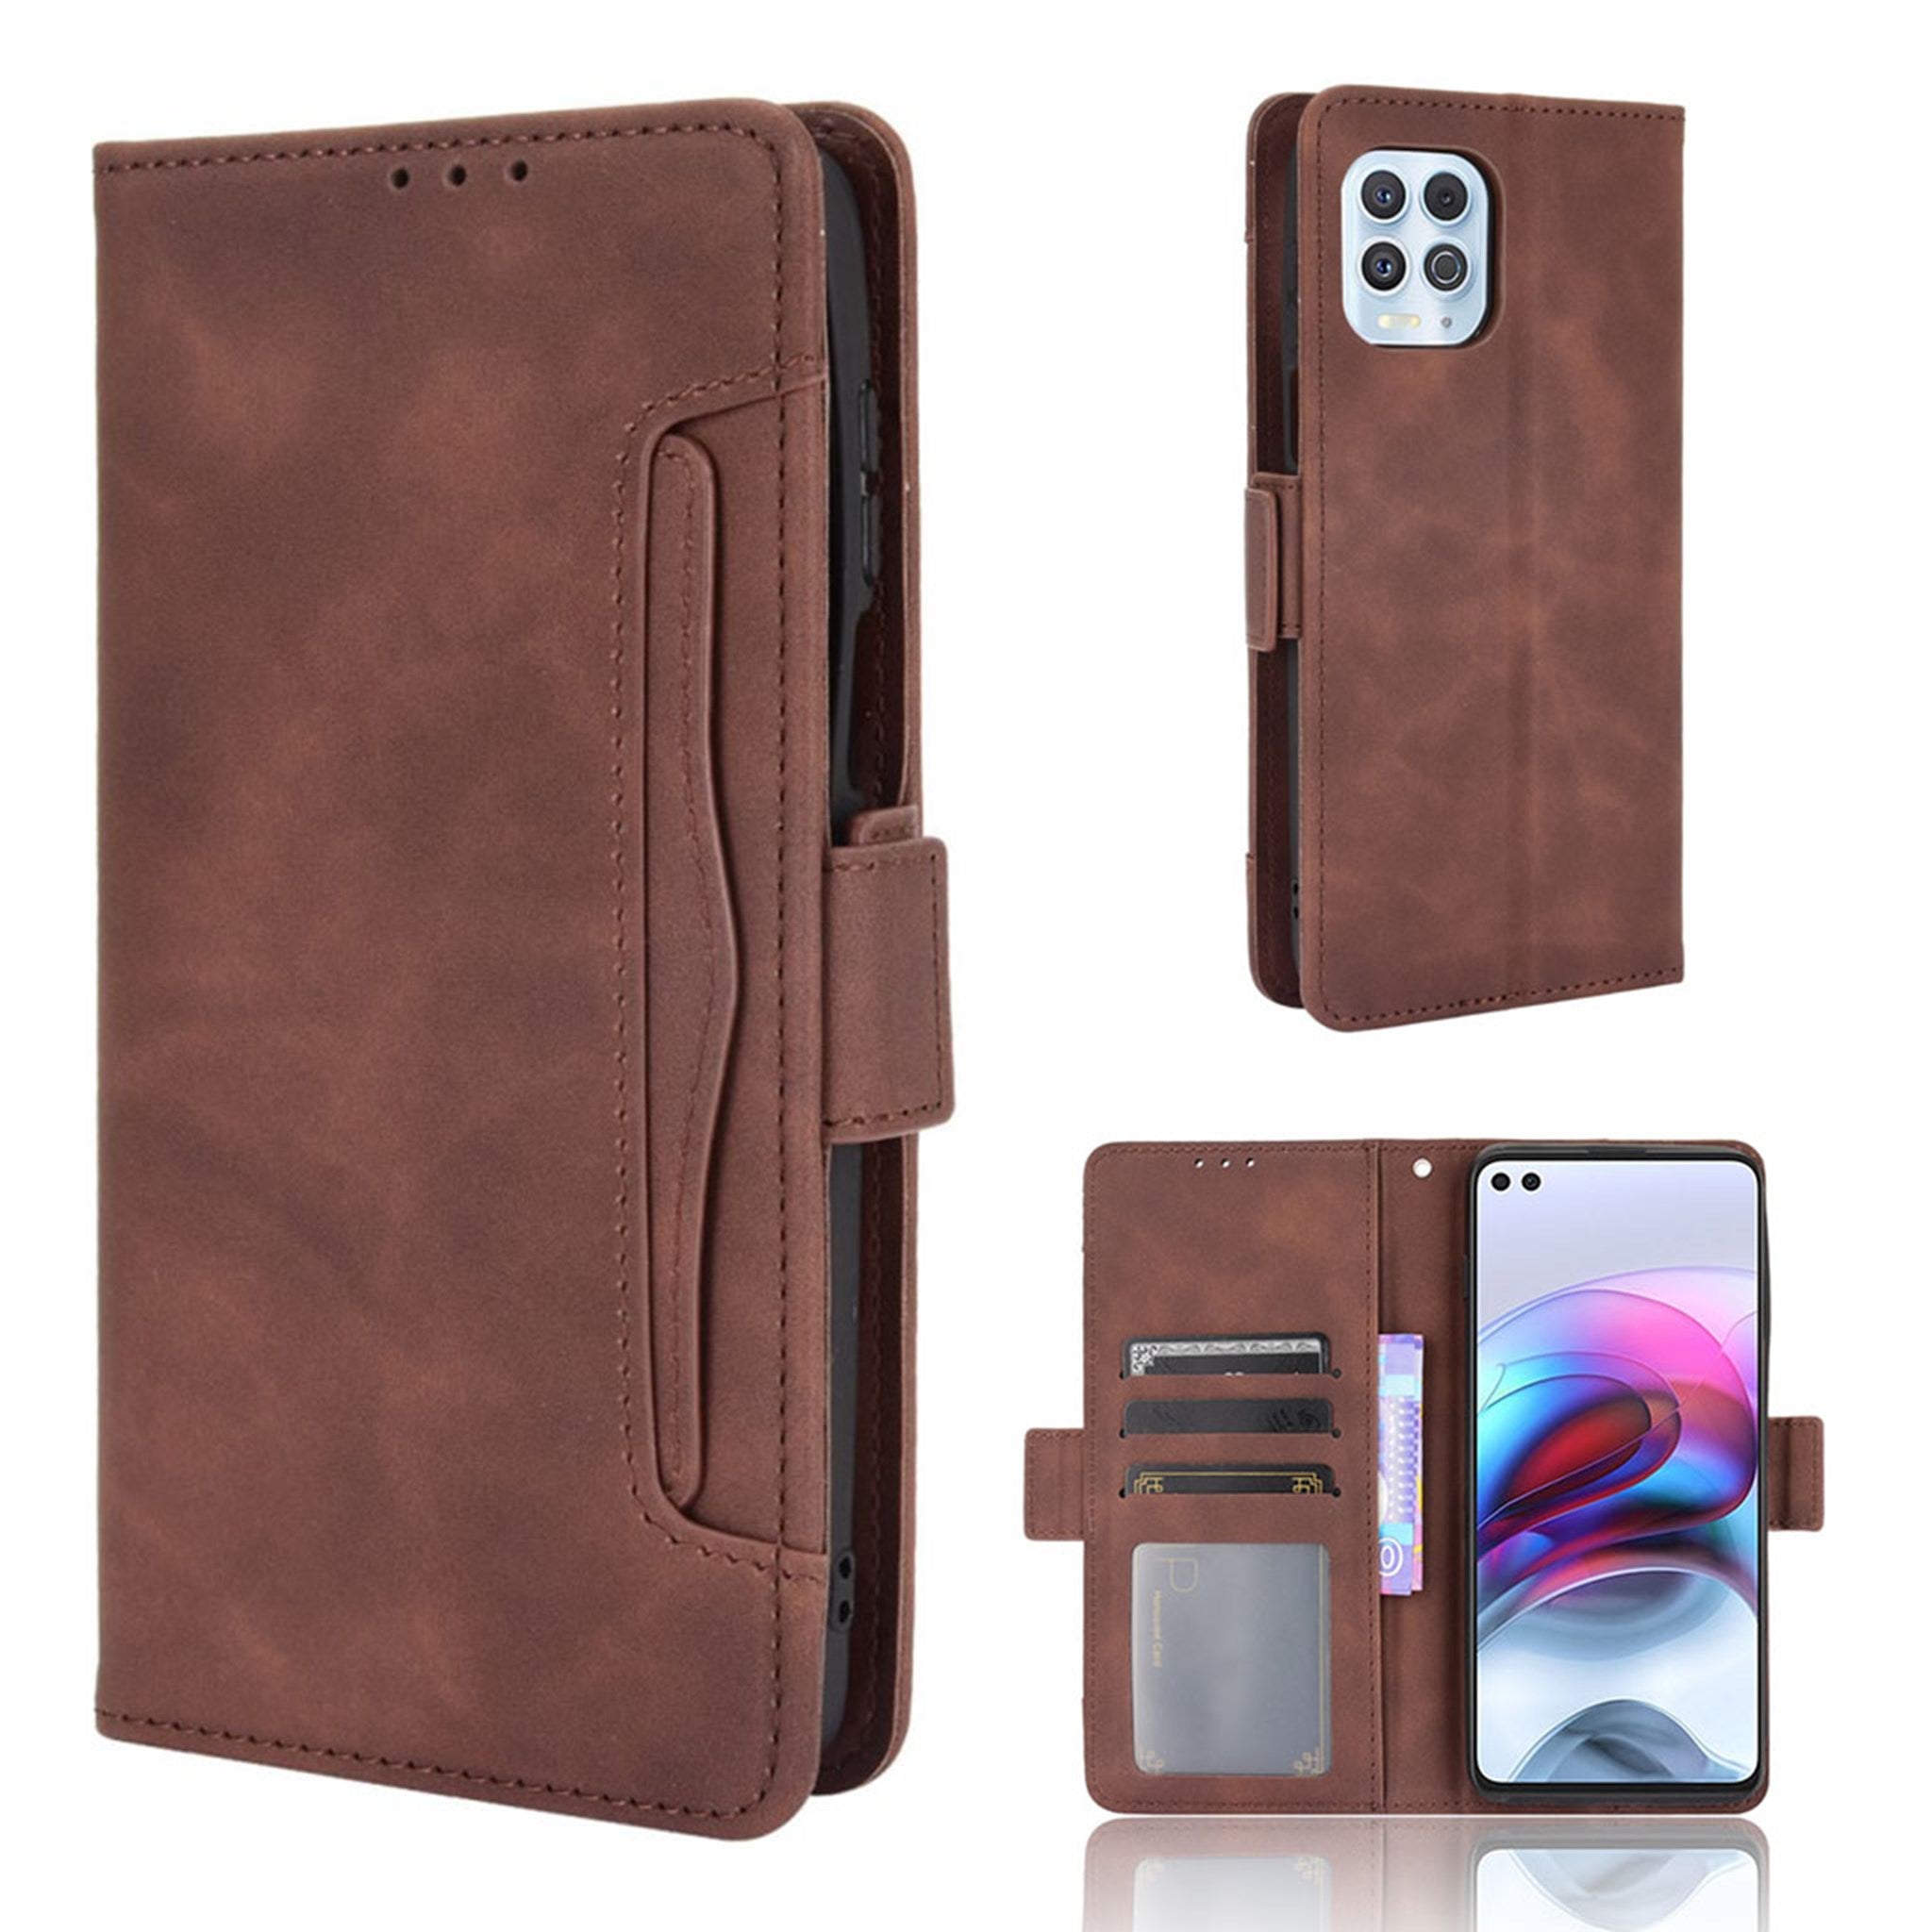 Modern-styled leather wallet case for Motorola Moto G100 / Edge S - Coffee